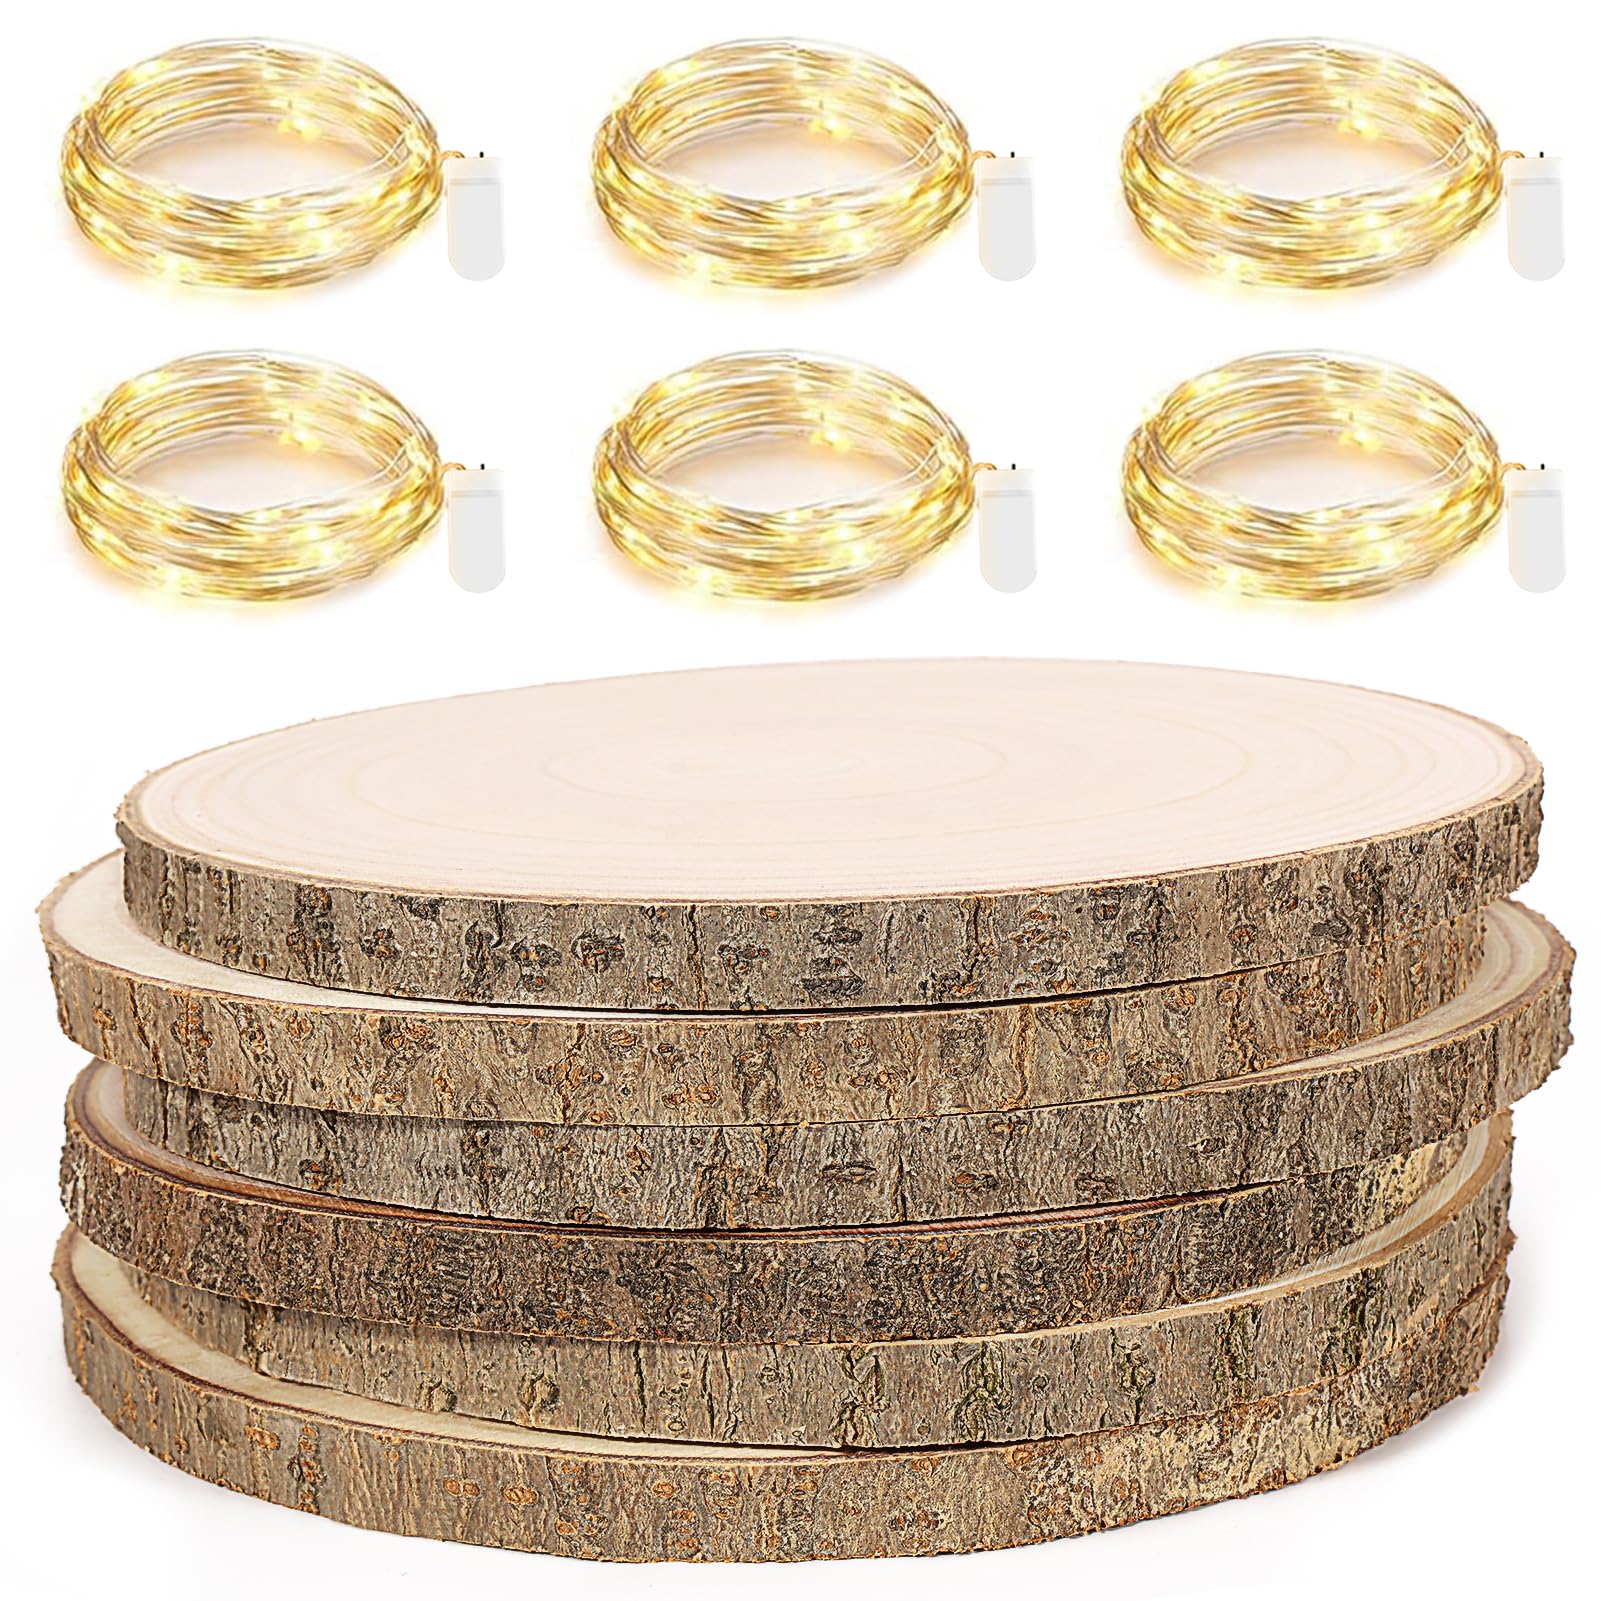 Pllieay 10 Piece 8-9 Inch Wood Slices, with 10 Fairy Lights, Wood Slices  for Centerpieces, Wood Circles for Weddings, Table Centerpieces Decor and